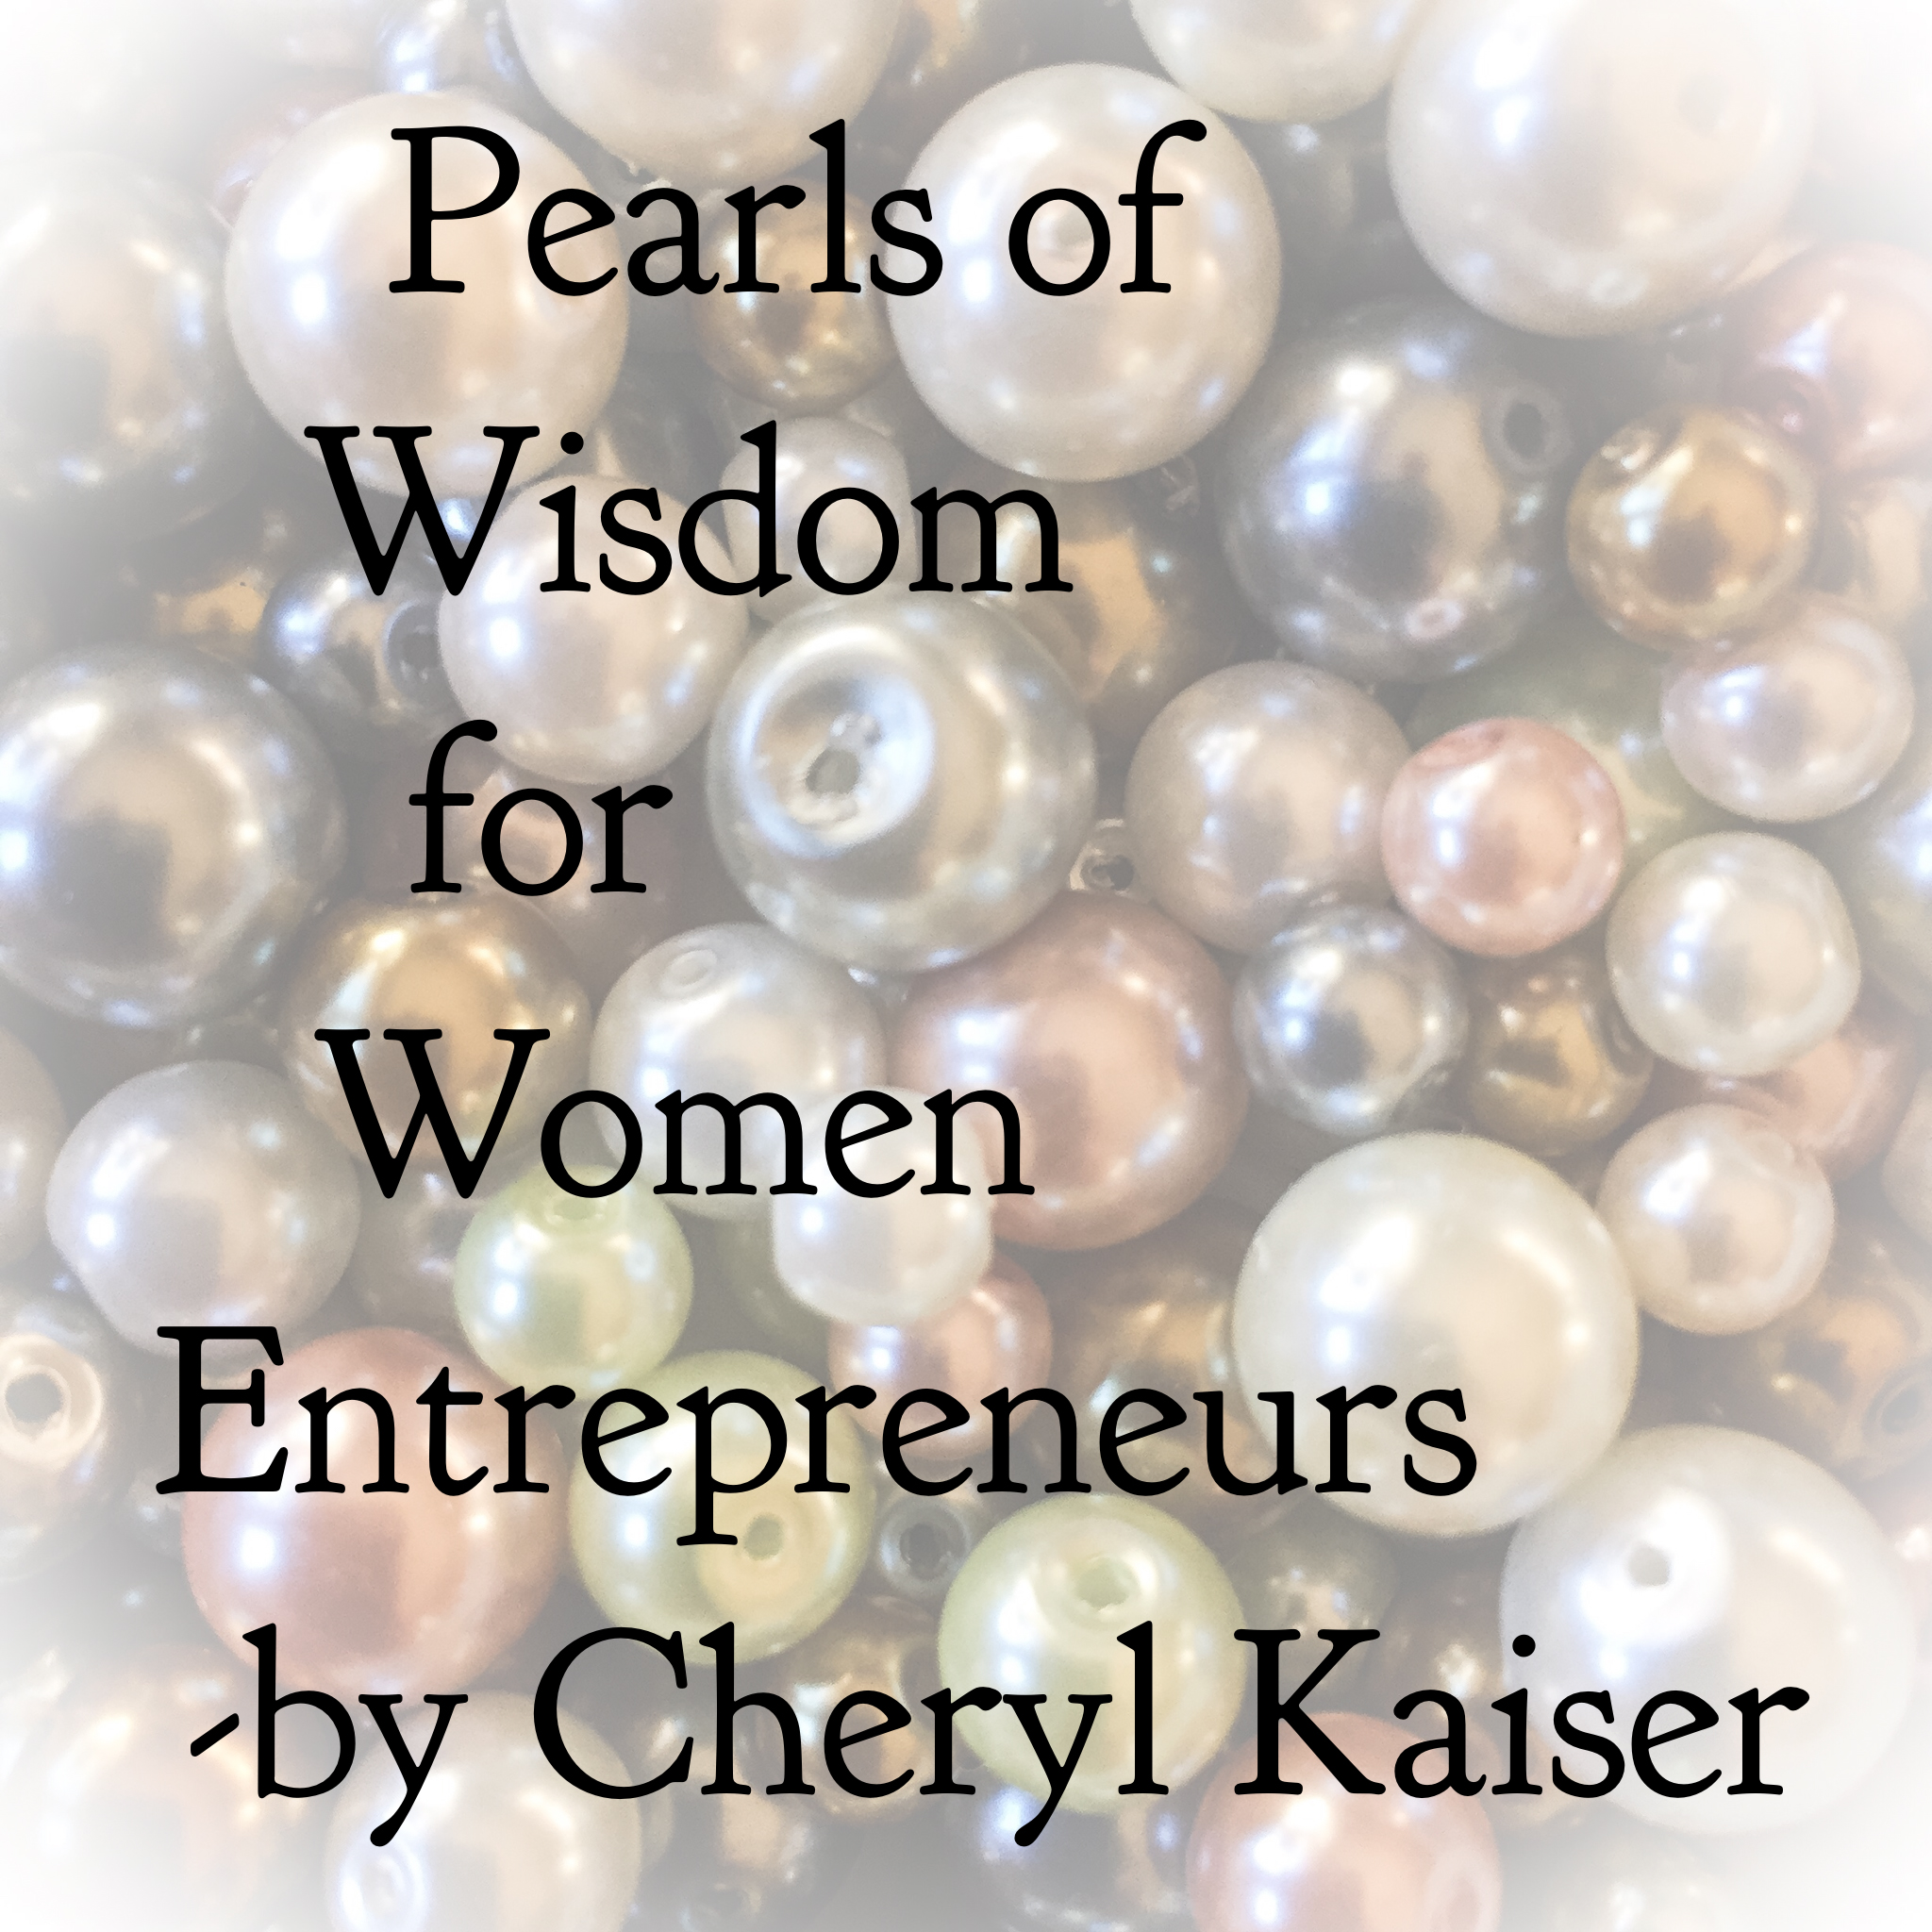 Pearls of Wisdom for the Passionate Woman Entrepreneur